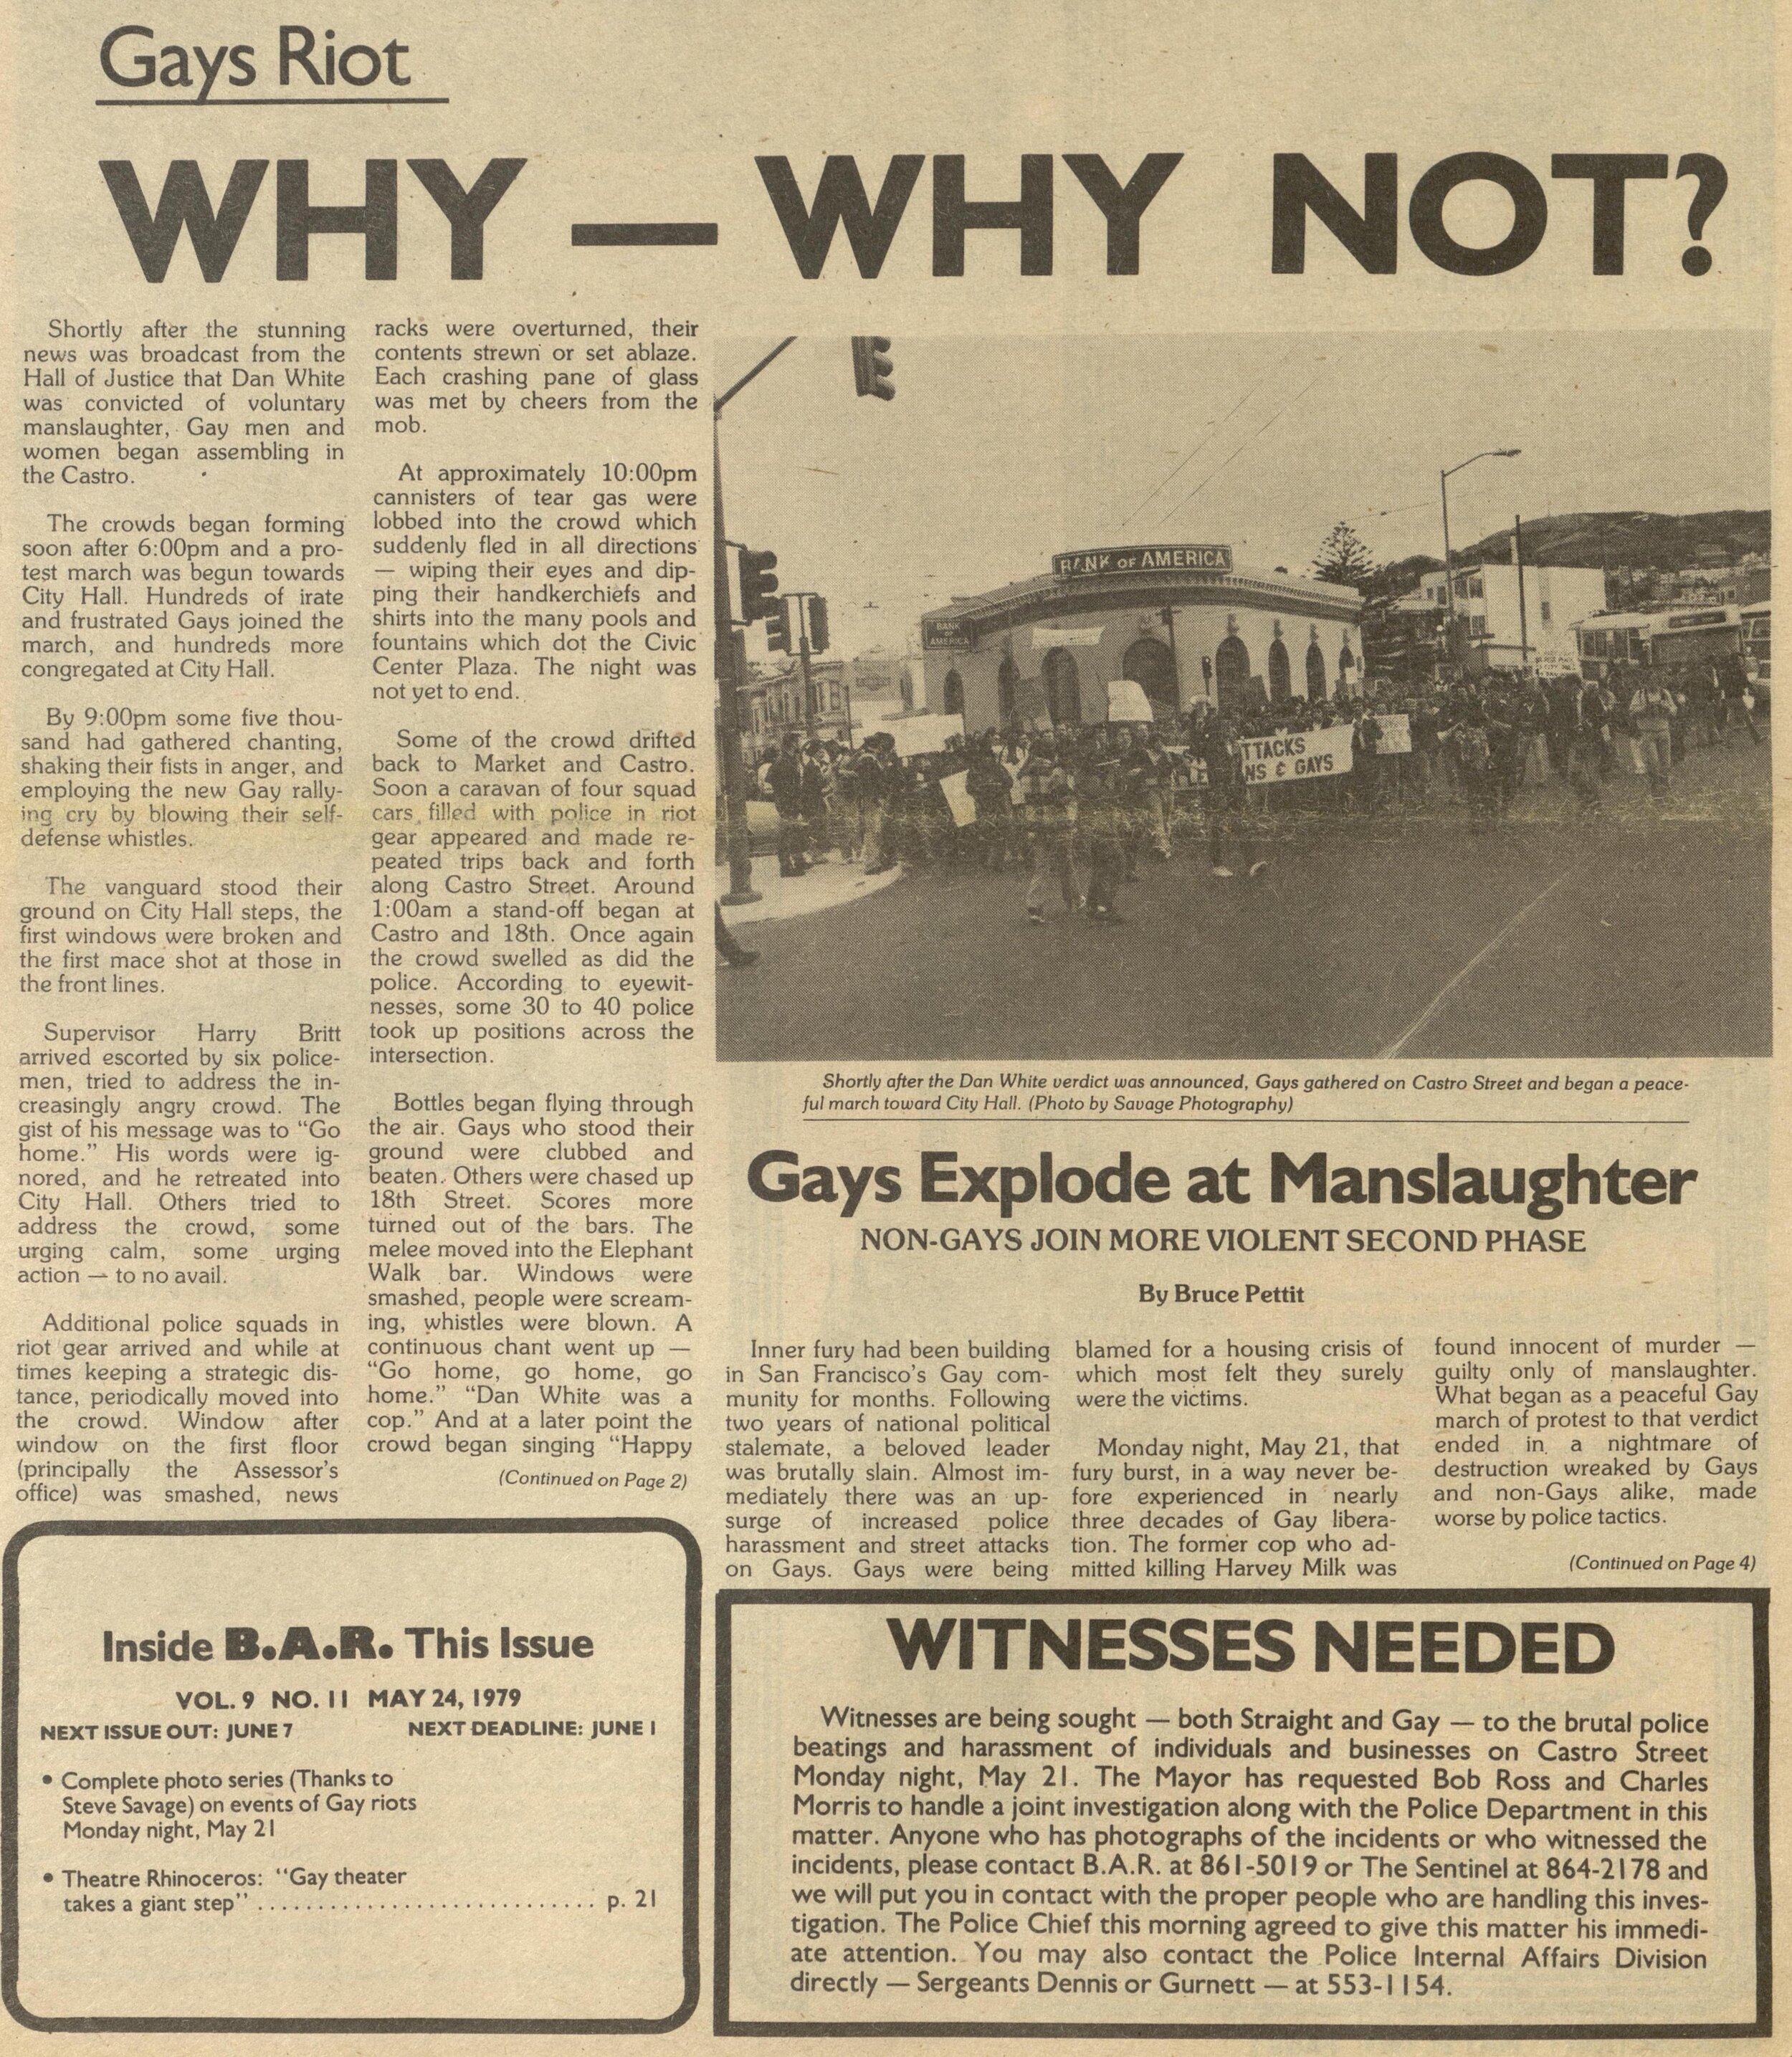  Vol. 9, No. 11, May 24, 1979.   Full Issue   